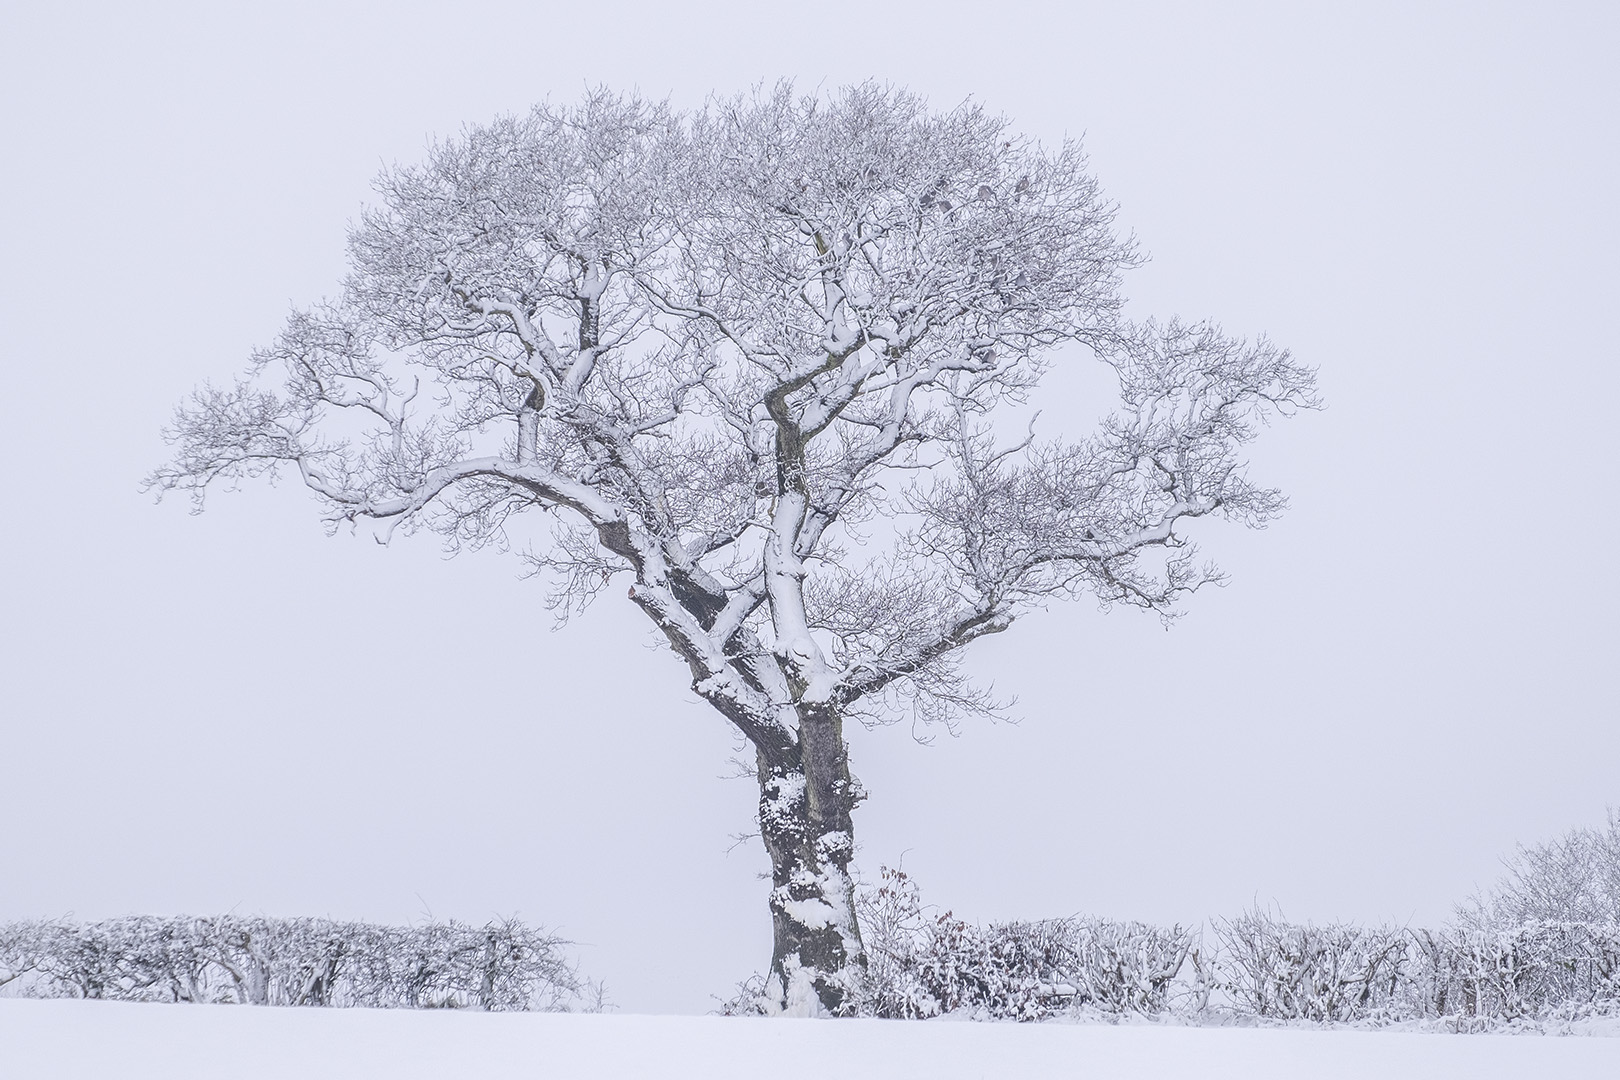 The tree in the snow